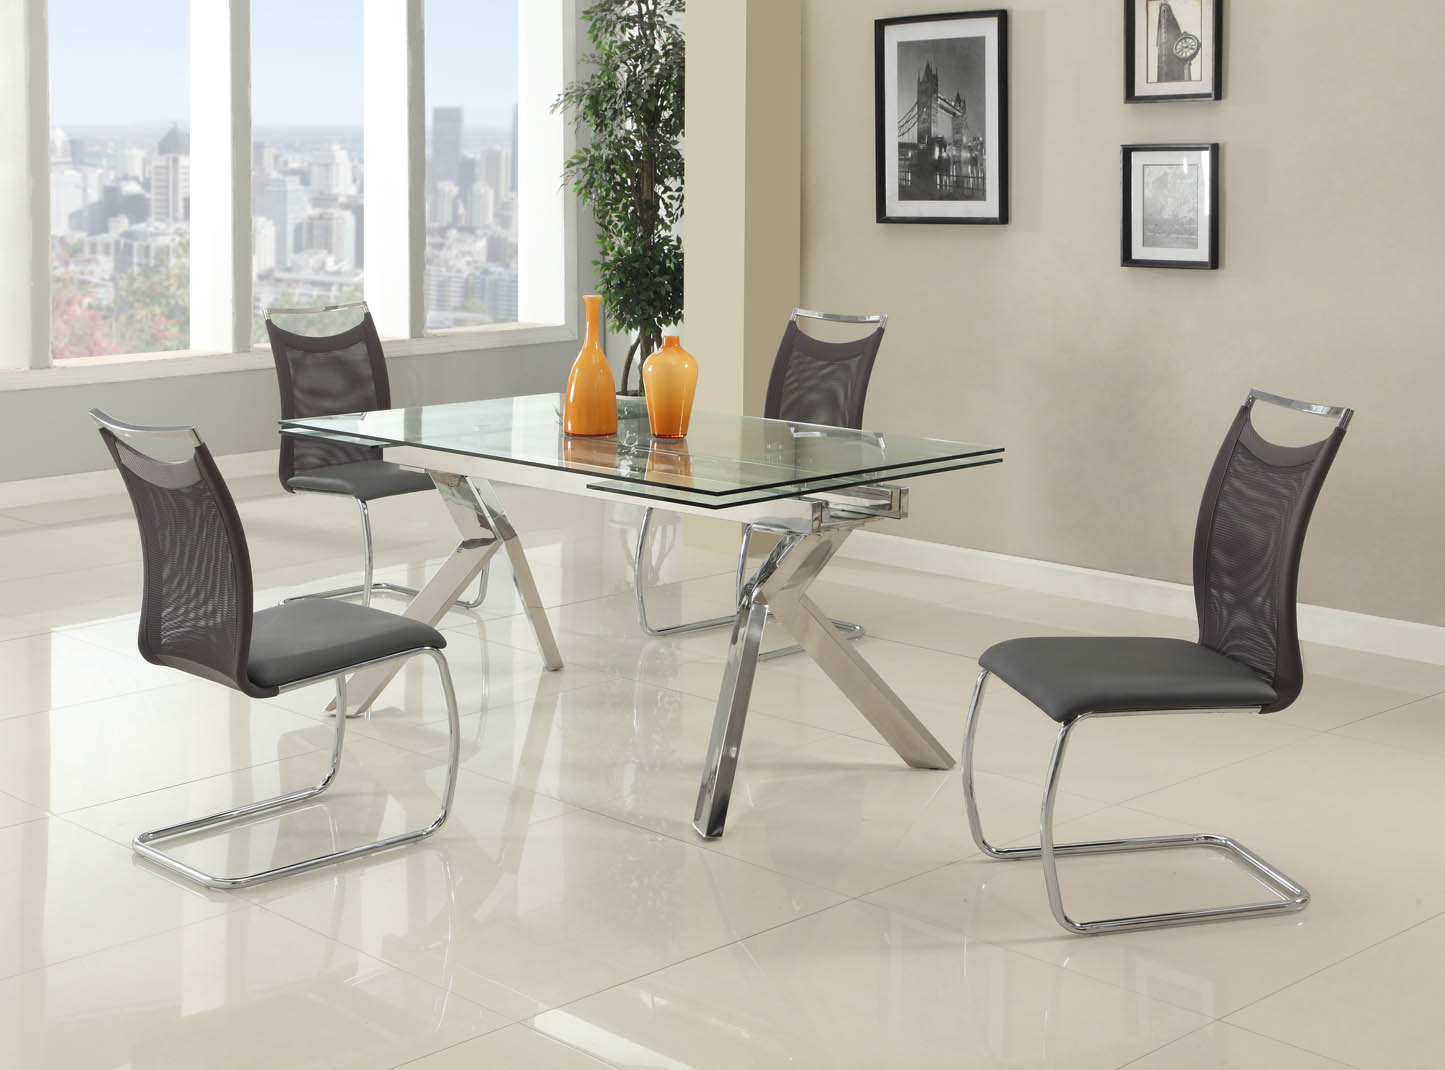 https://www.primeclassicdesign.com/images/modern-dining-sets/glass-table-with-two-leafs-extensions-chairs-kitchen-chella.jpg